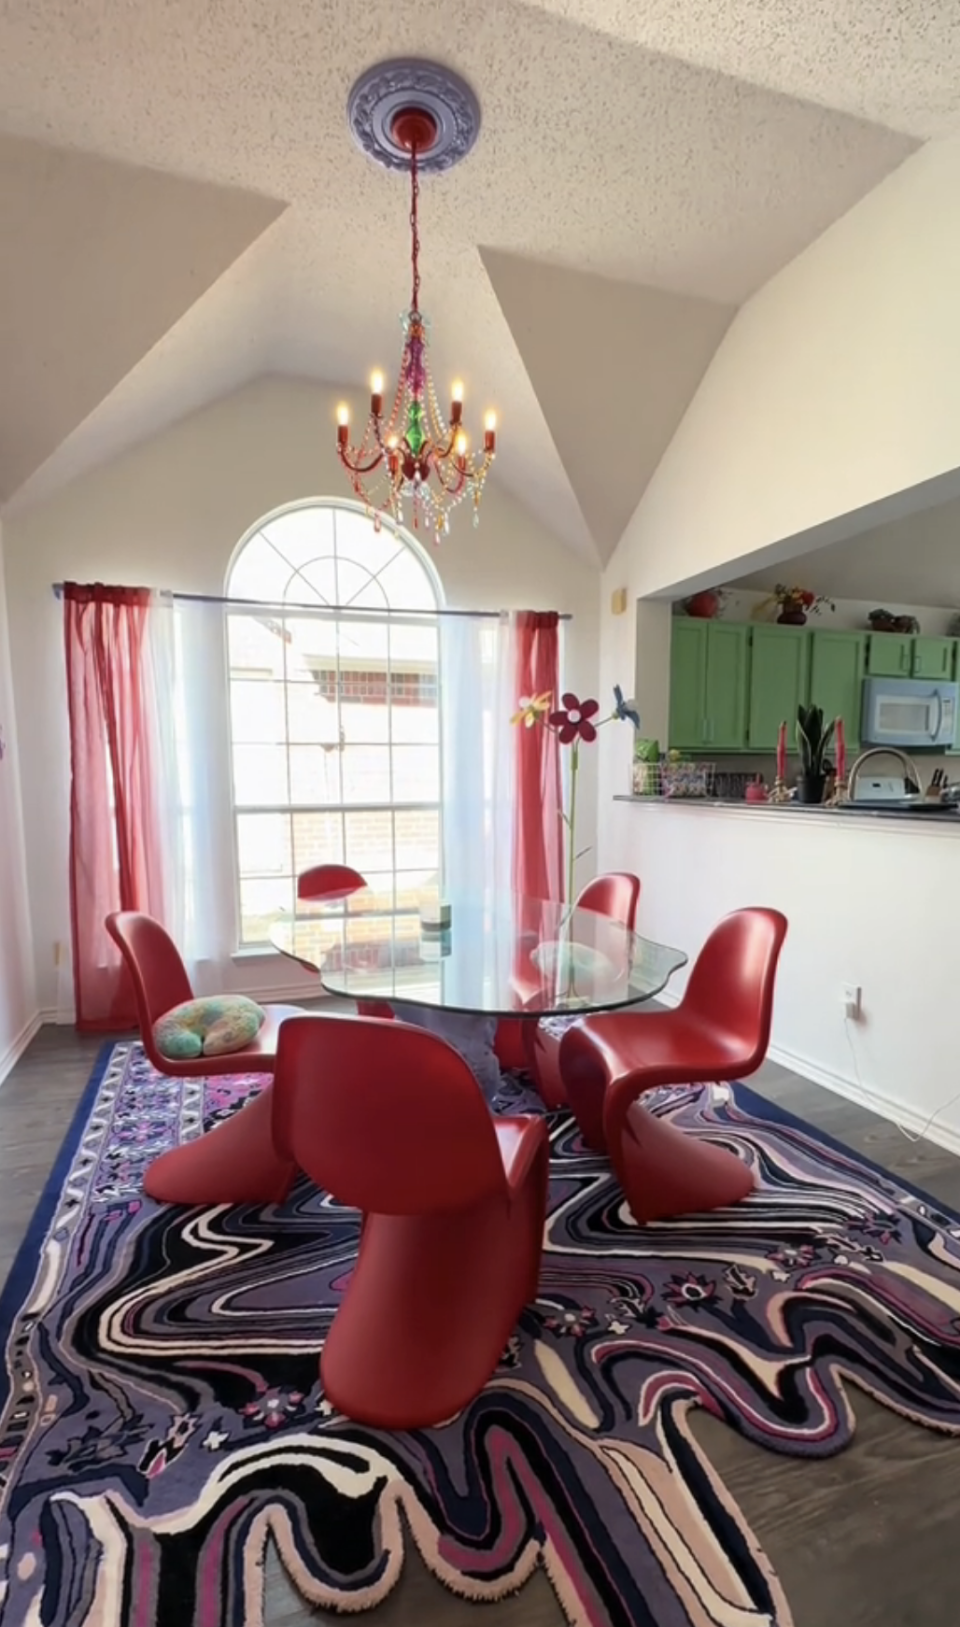 Interior room with a modern design featuring a glass table, red chairs, a colorful rug, and a chandelier